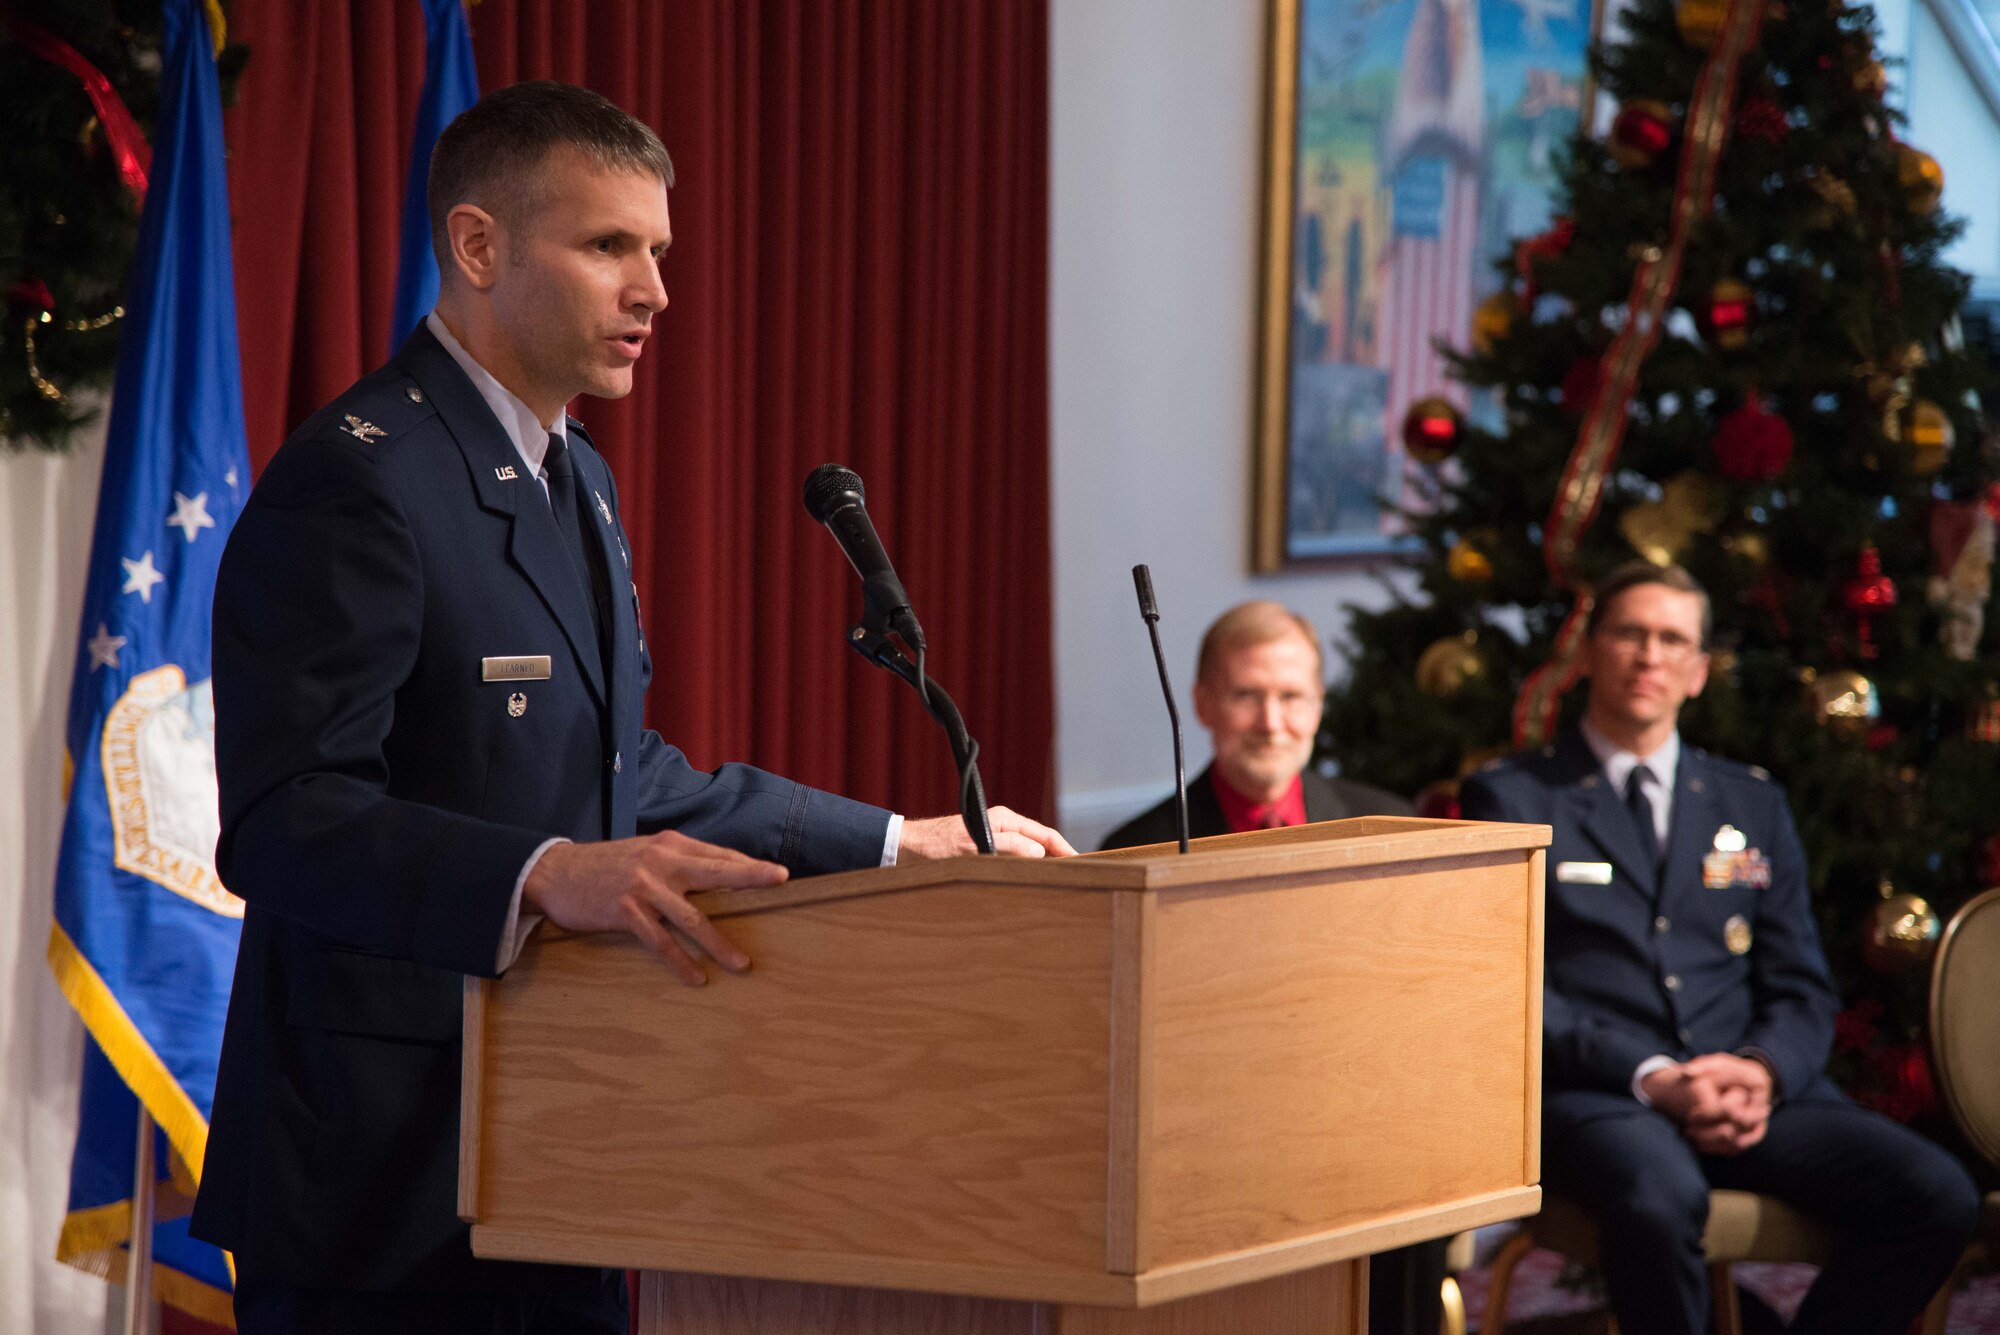 U.S. Air Force Col. David Learned, the JSTARS Recapitalization senior materiel leader addresses Airmen during the JSTARS Recap Division stand-up ceremony at Hanscom Air Force Base, Mass., Dec. 5, 2014. Lt. Col. Michael Harm, far right, led the recap effort since its recreation in Dec. 2013, advocating for $73 million that is now fully funded by the Senate. Ken Francois, former Battle Management deputy, will now serve as the new JSTARS Recap Division's deputy. (U.S. Air Force photo by Mark Herlihy) 